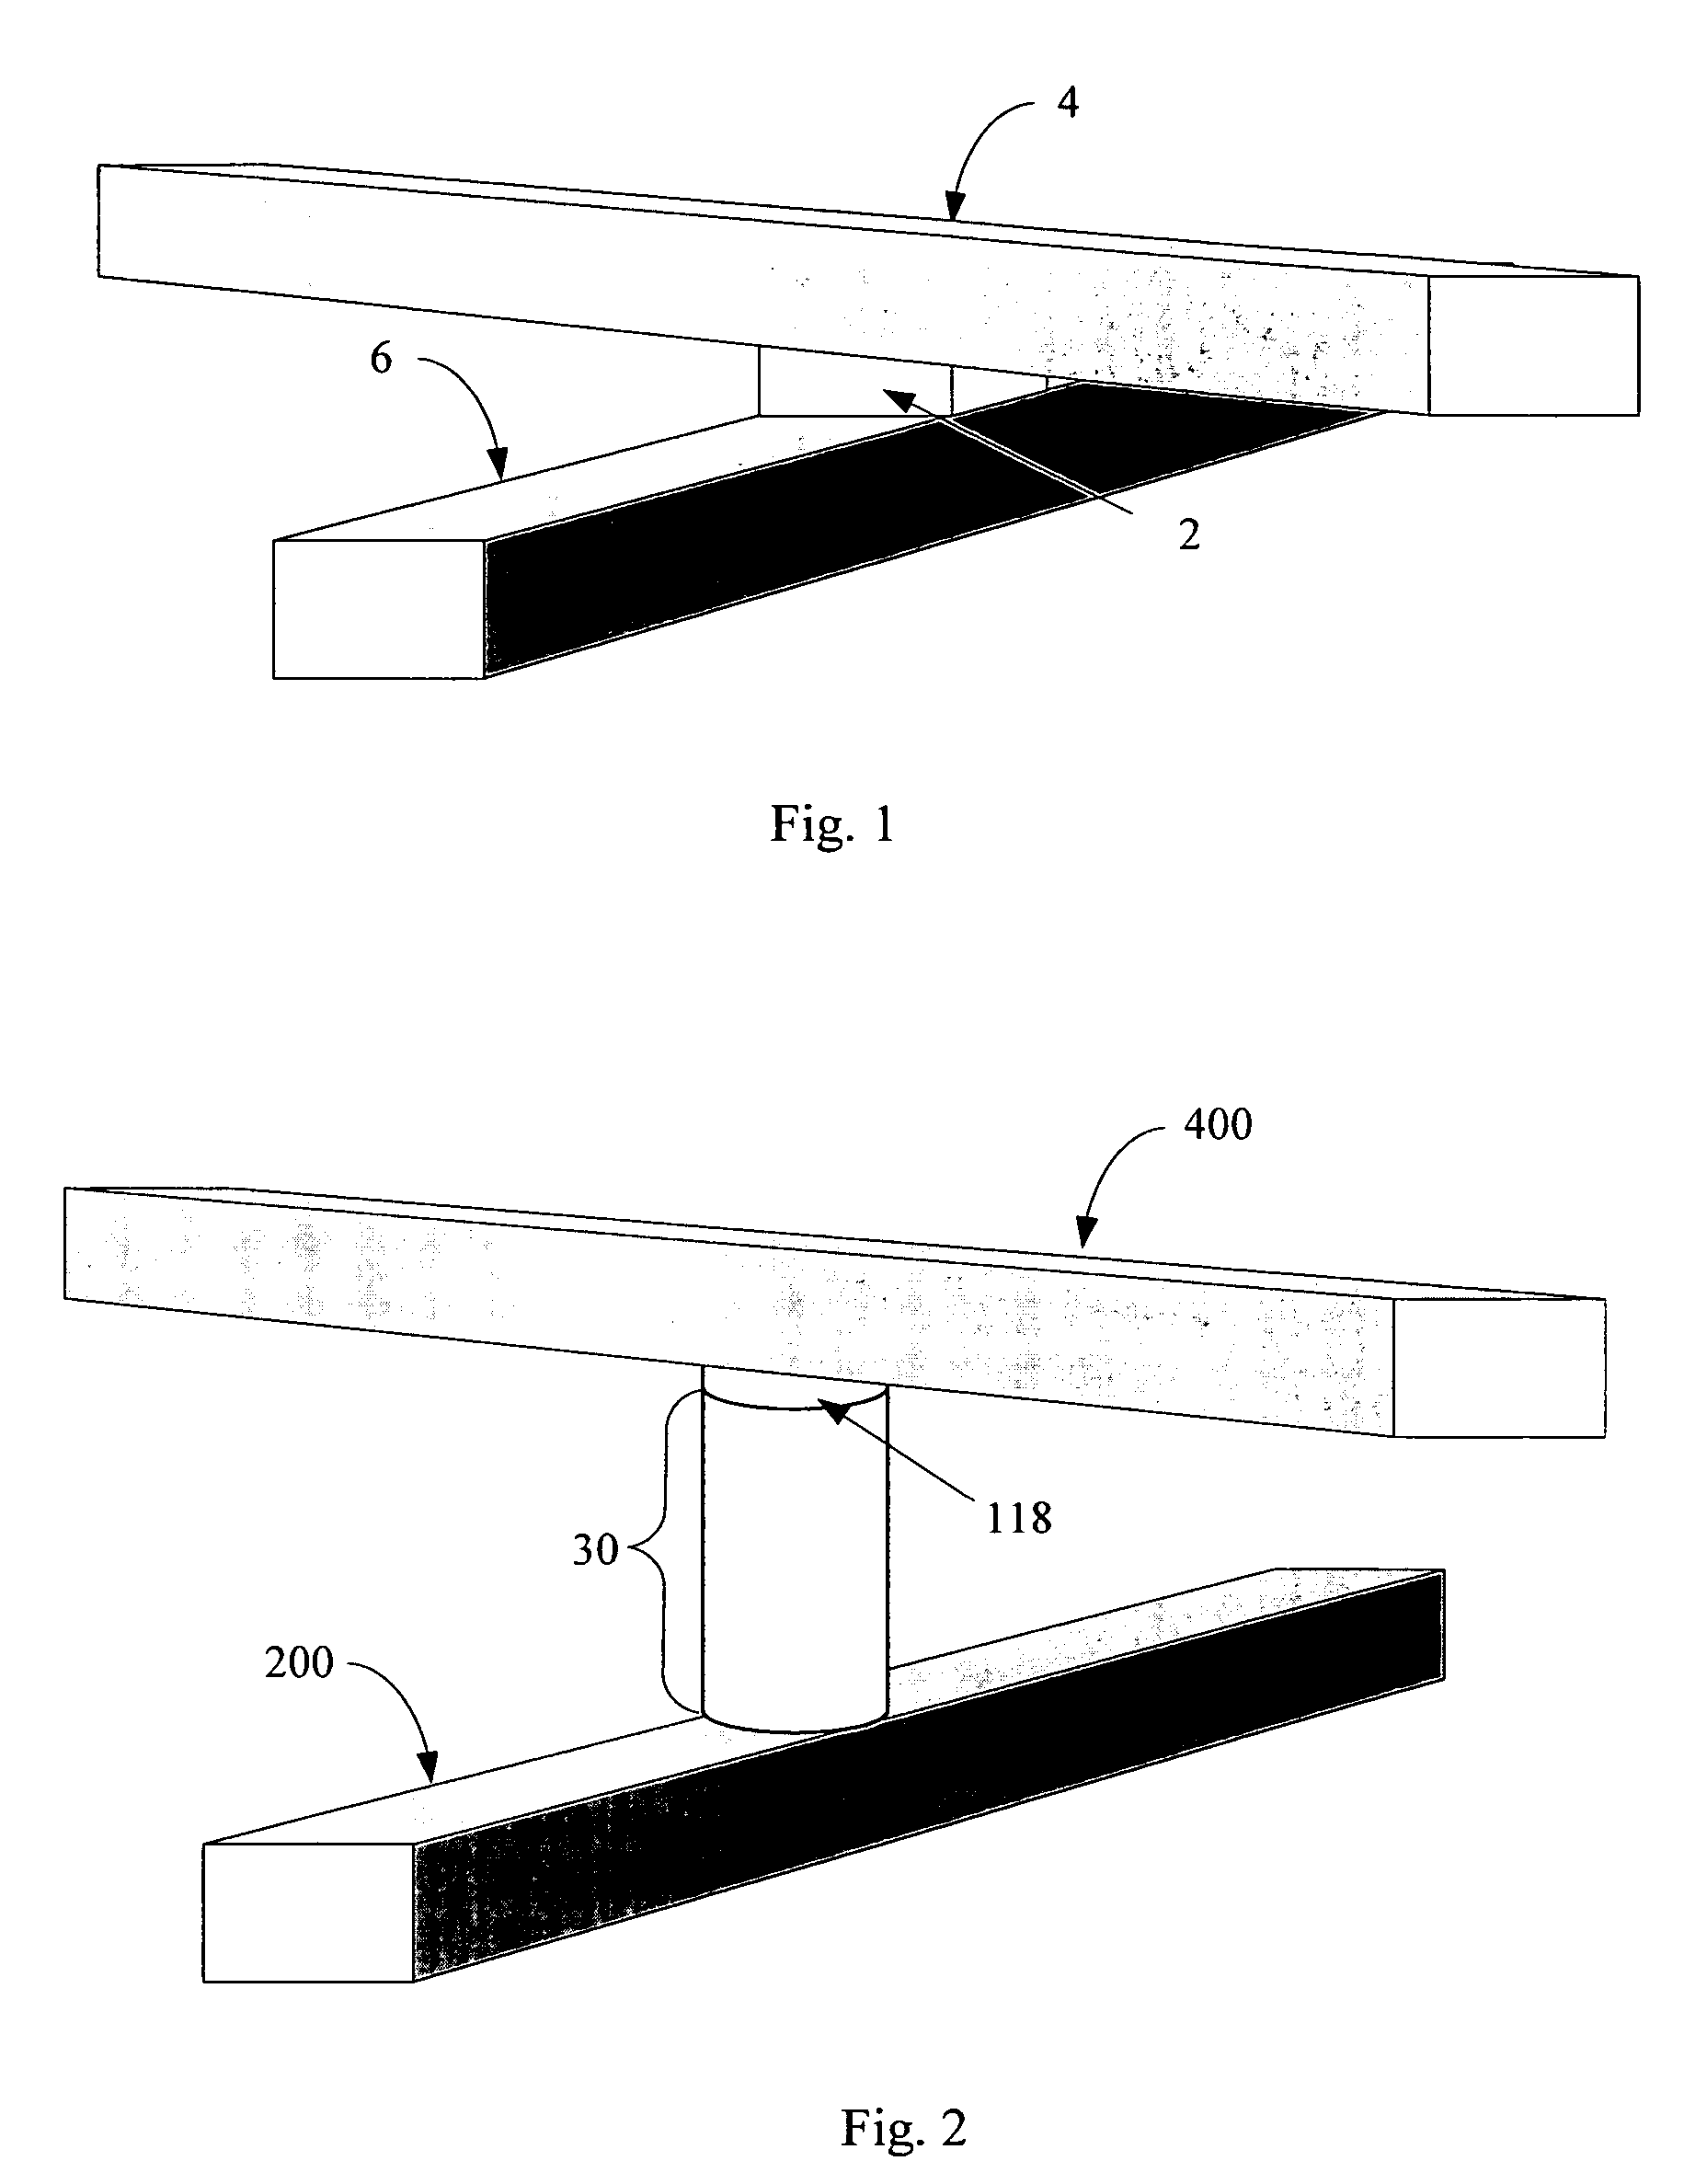 Nonvolatile memory cell comprising a diode and a resistance-switching material